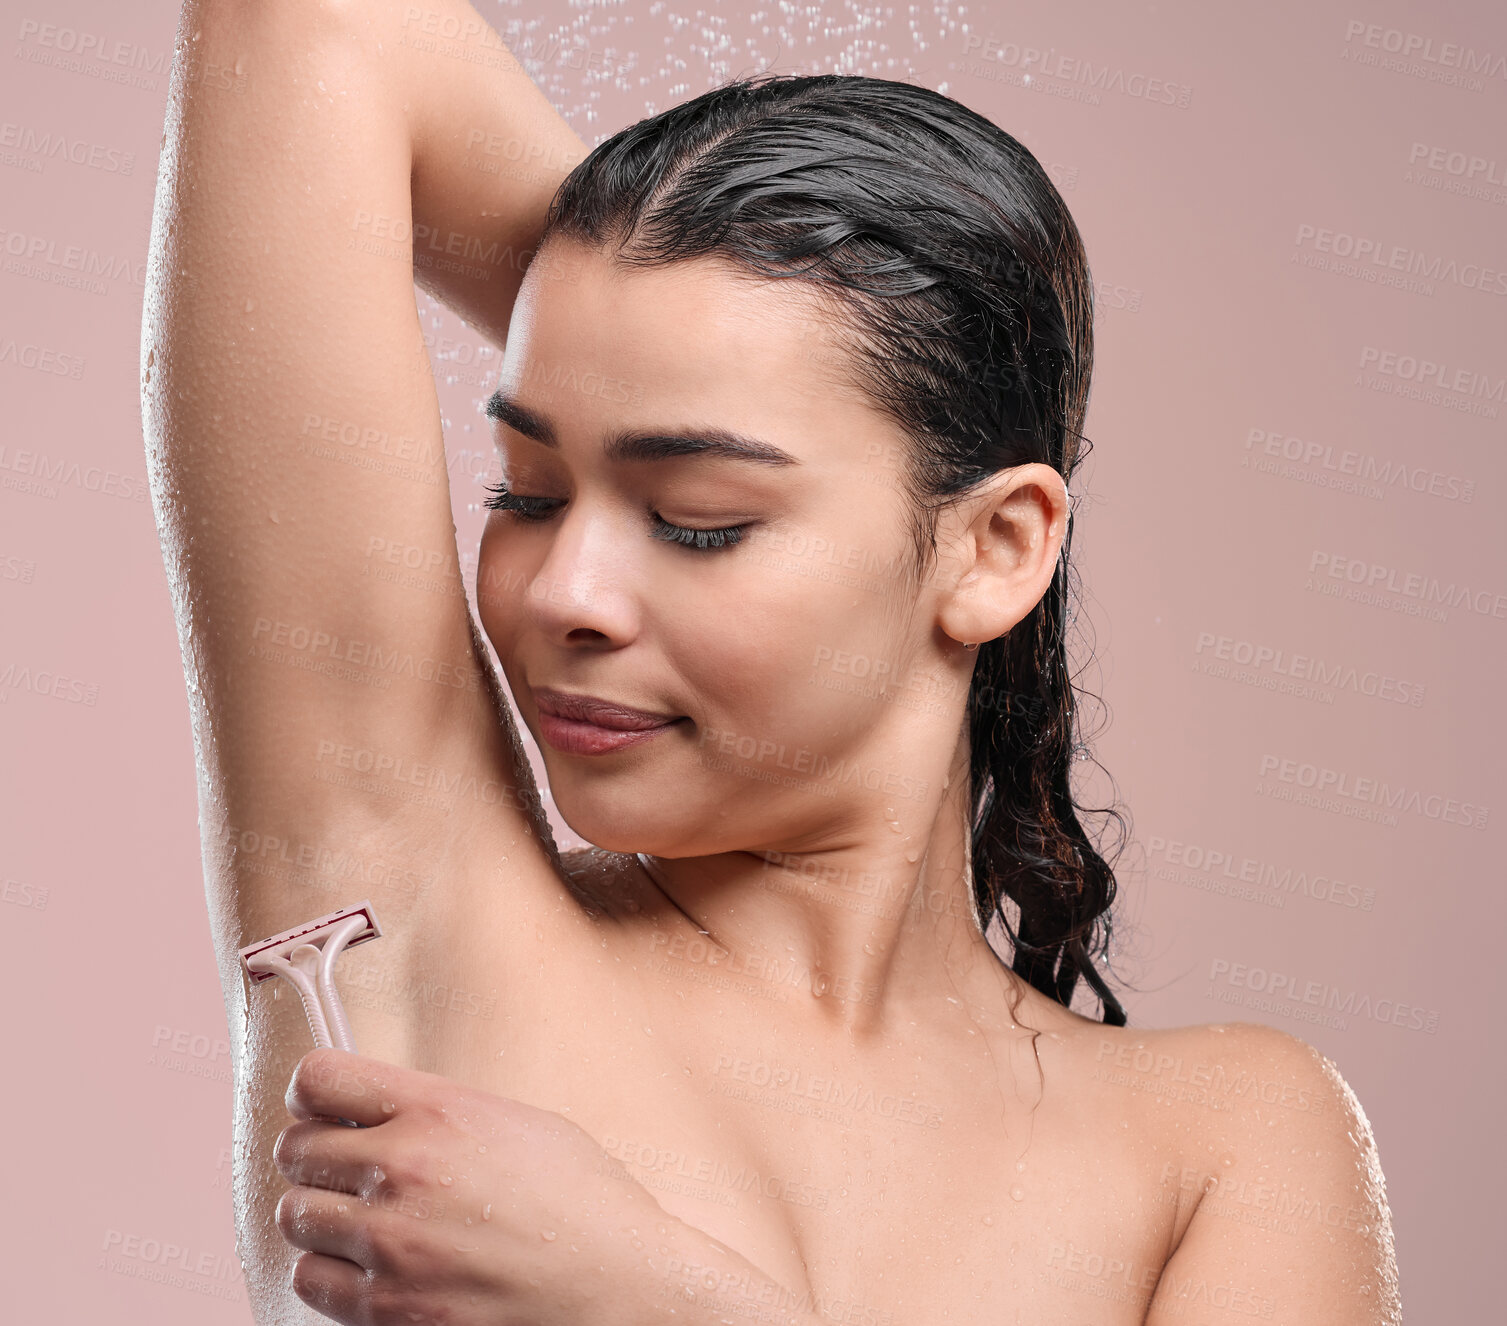 Buy stock photo Shot of a young woman shaving her armpits against a studio background